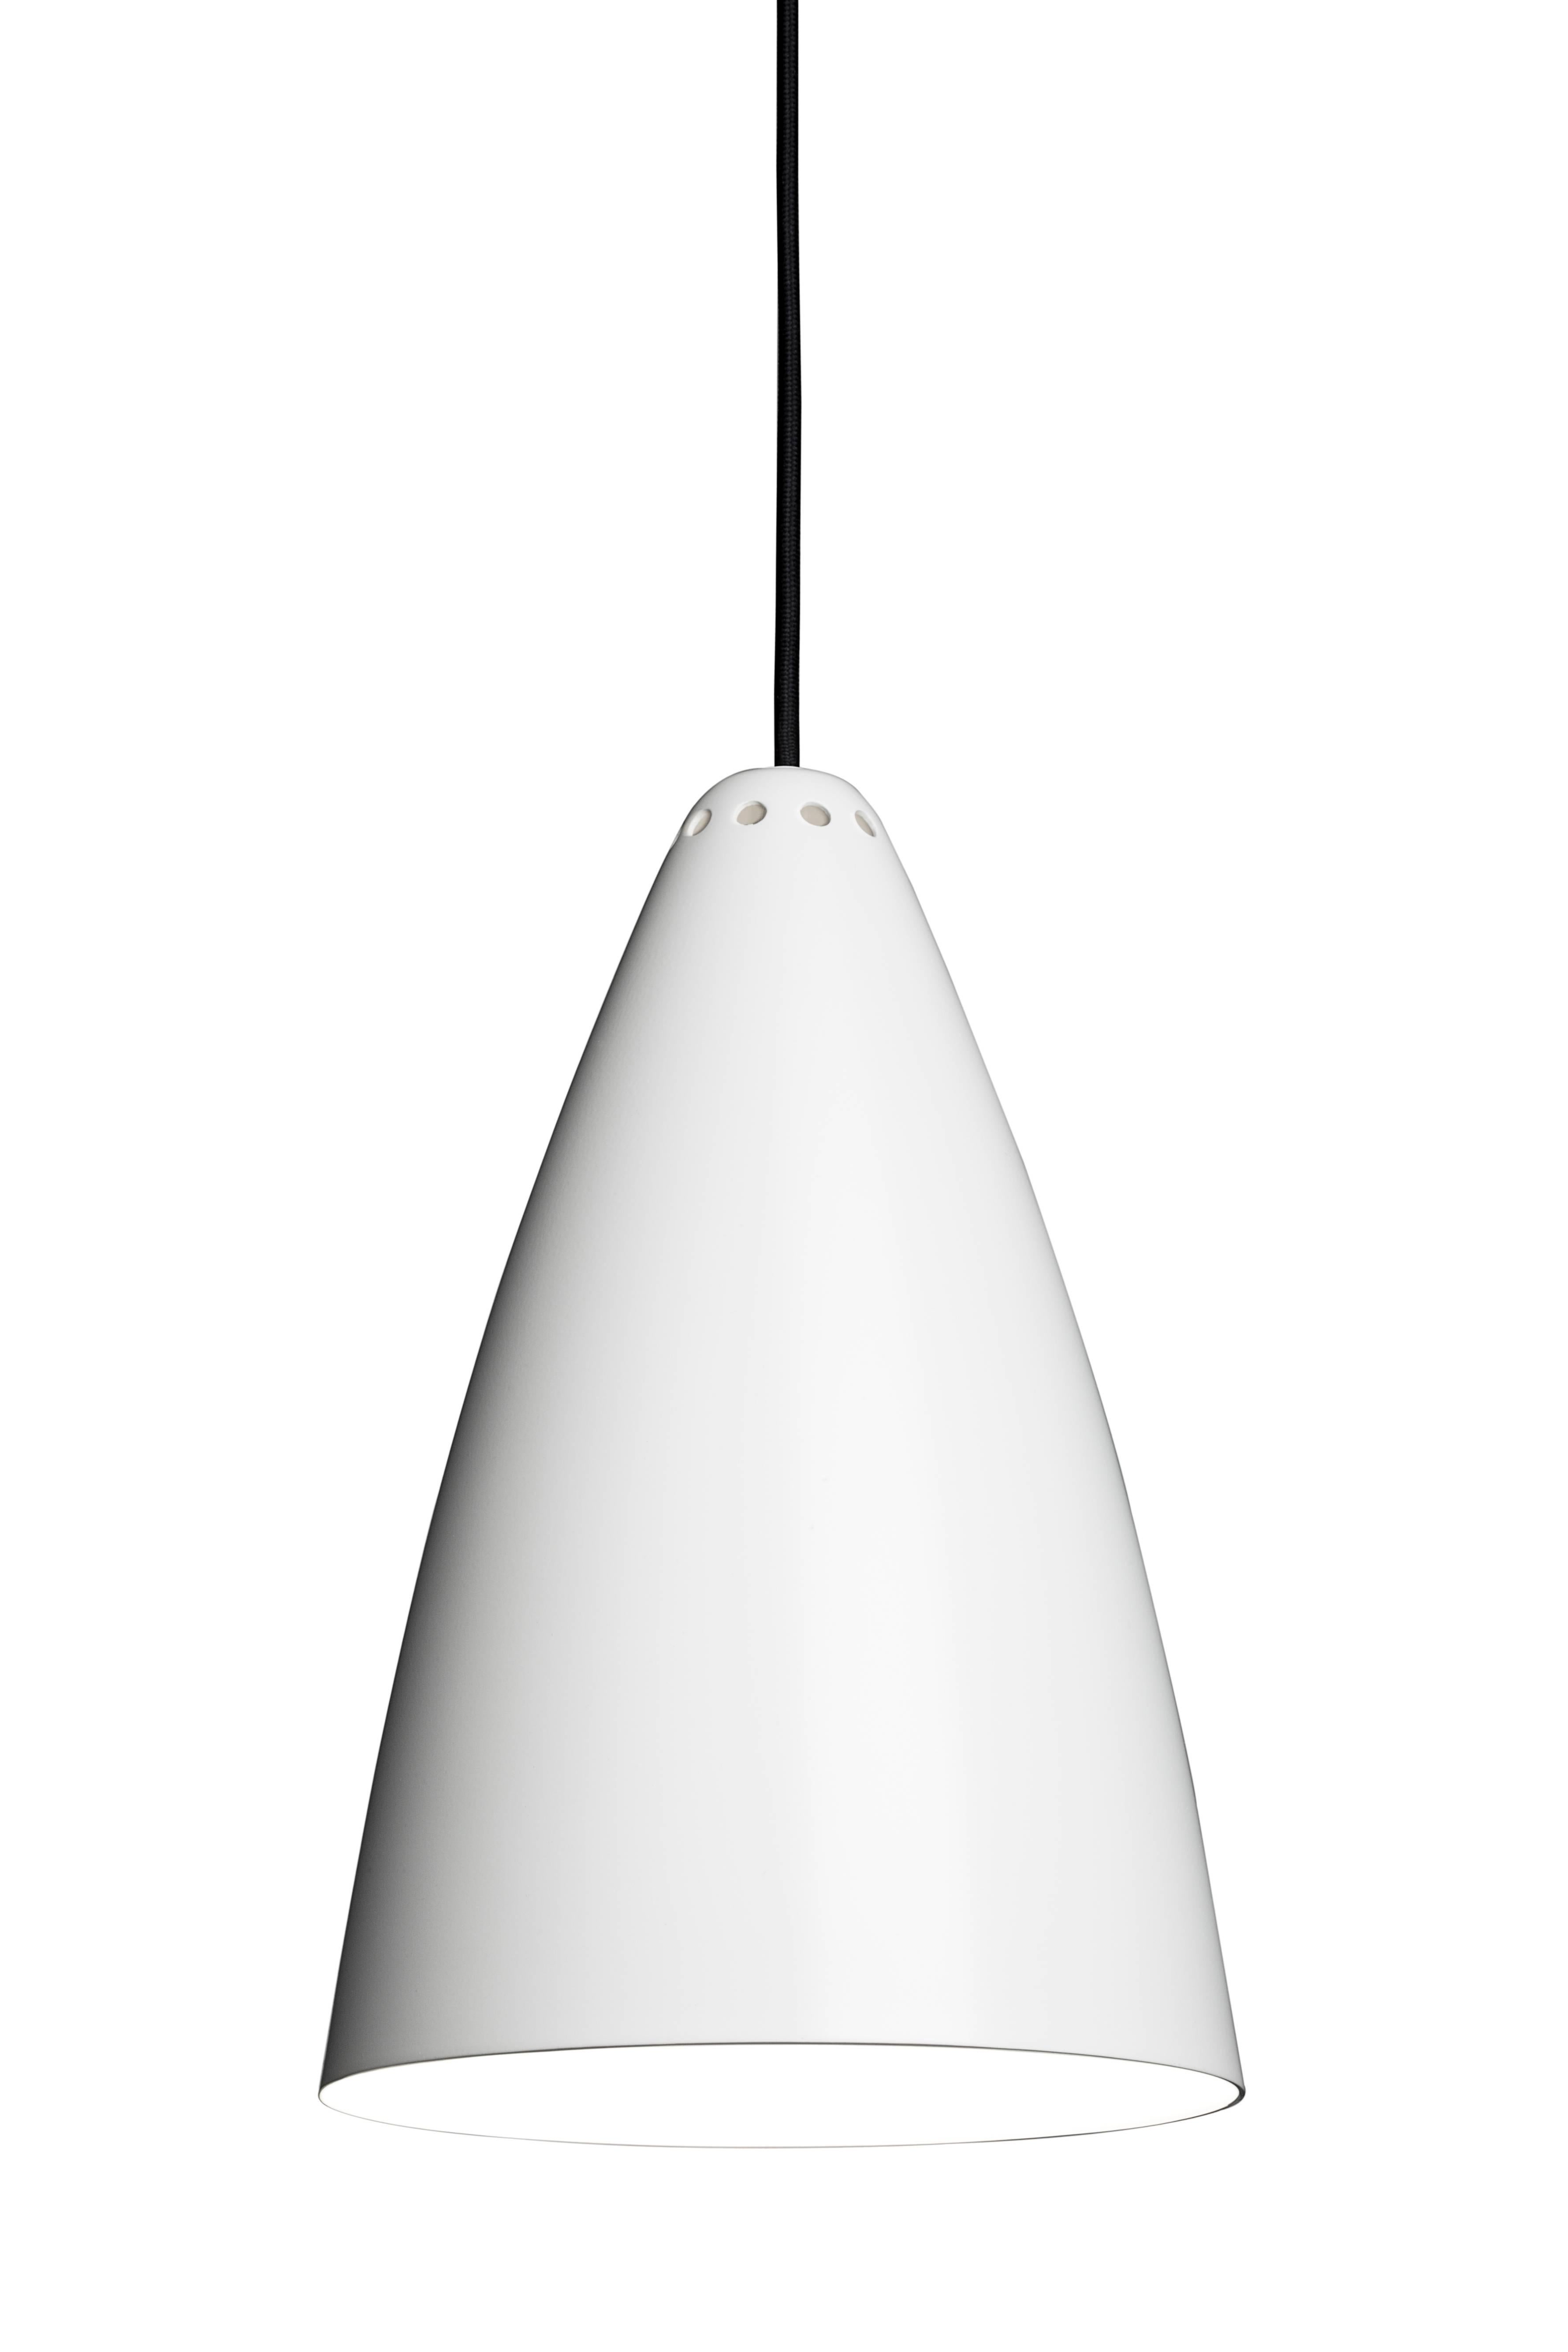 Lisa Johansson-Pape '1959' gray pendant for Innolux Oy. Originally designed in 1959, these authorized re-editions are true to the original charming simplicity of Pape's iconic Finnish design. The white interior of each metallic shade efficiently